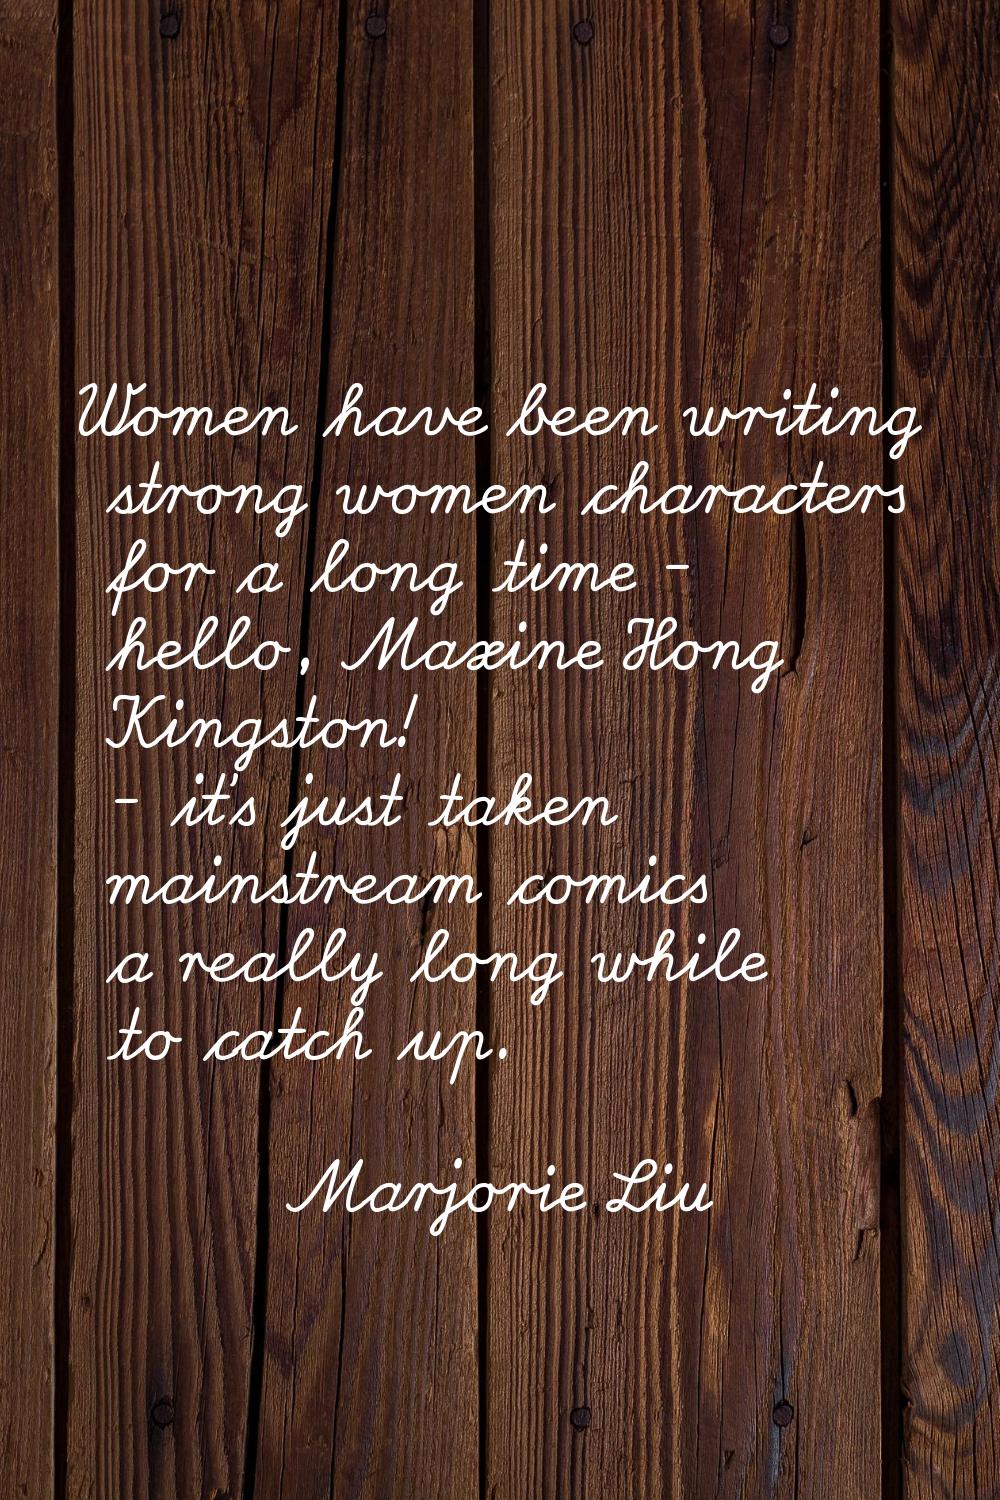 Women have been writing strong women characters for a long time - hello, Maxine Hong Kingston! - it